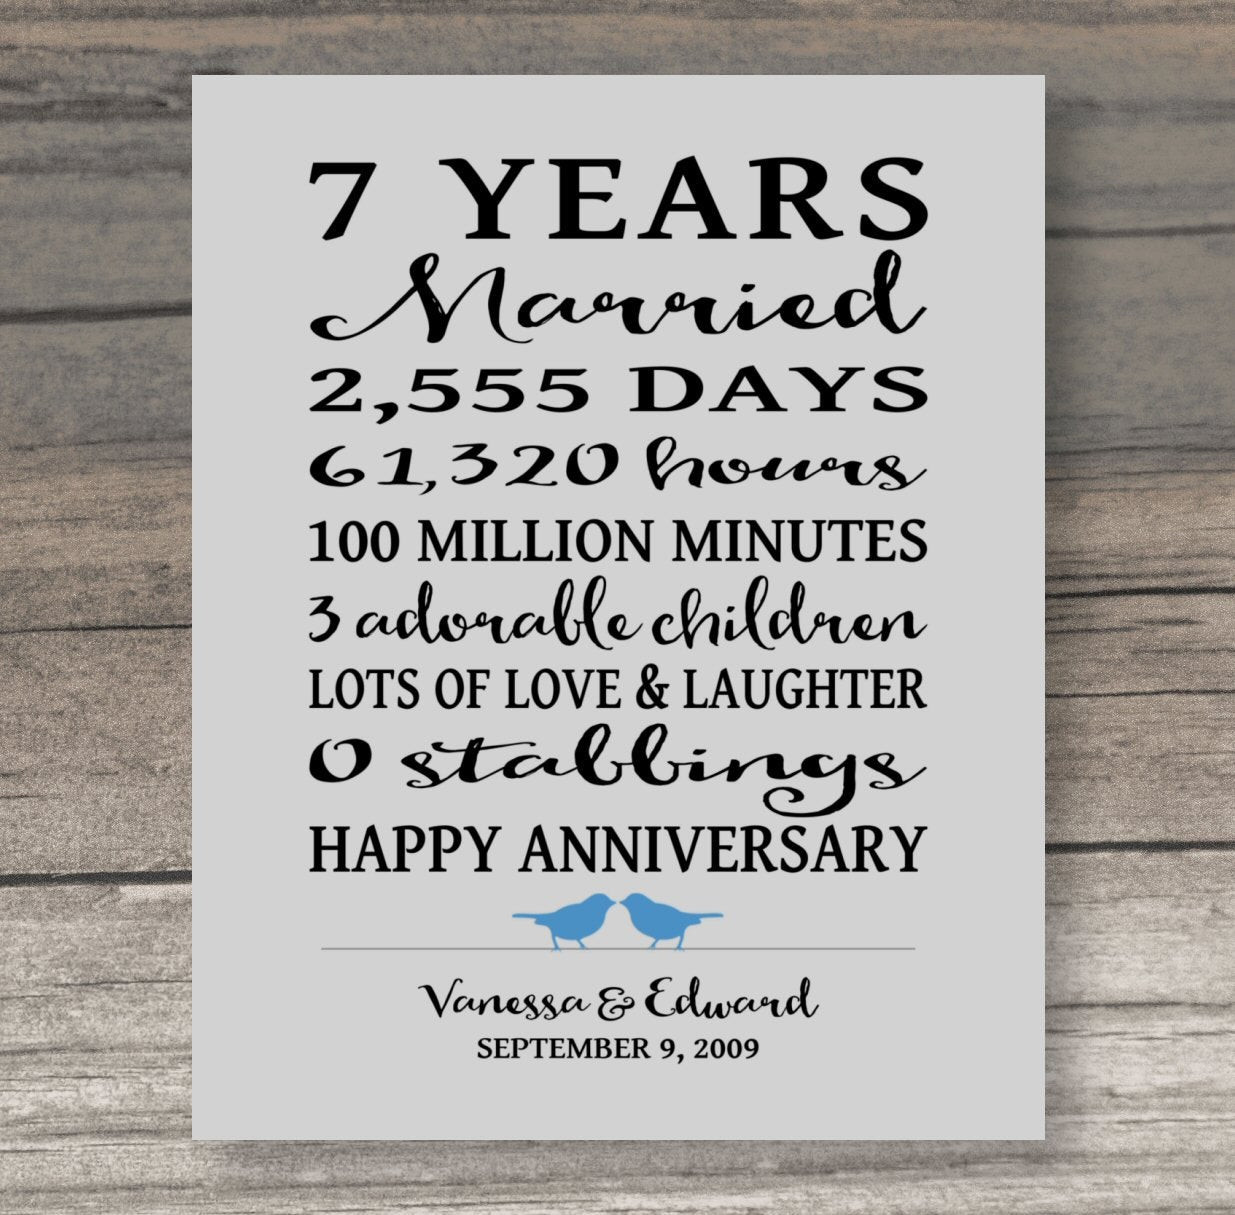 7 Yr Anniversary Gift Ideas
 7 Year ANNIVERSARY GIFT Funny Anniversary Gift for Spouse Art